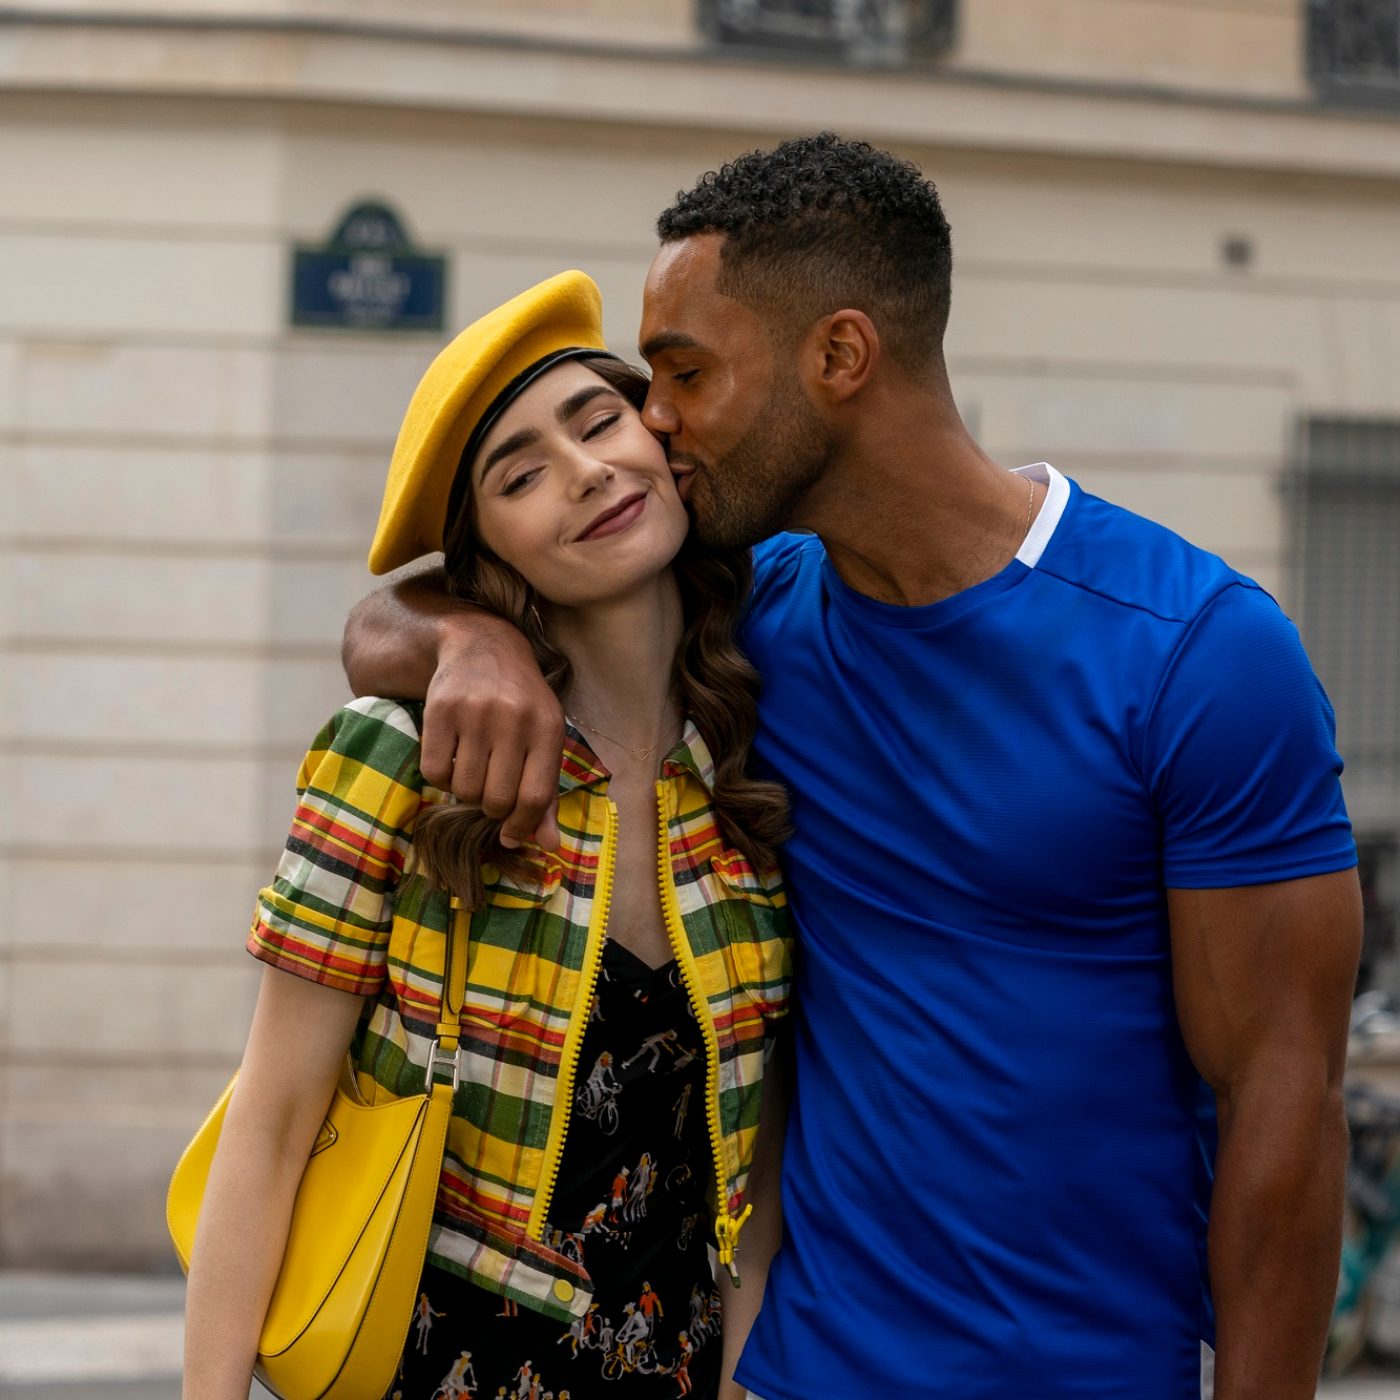 Emily in Paris Season 1 primer: What to know before you watch